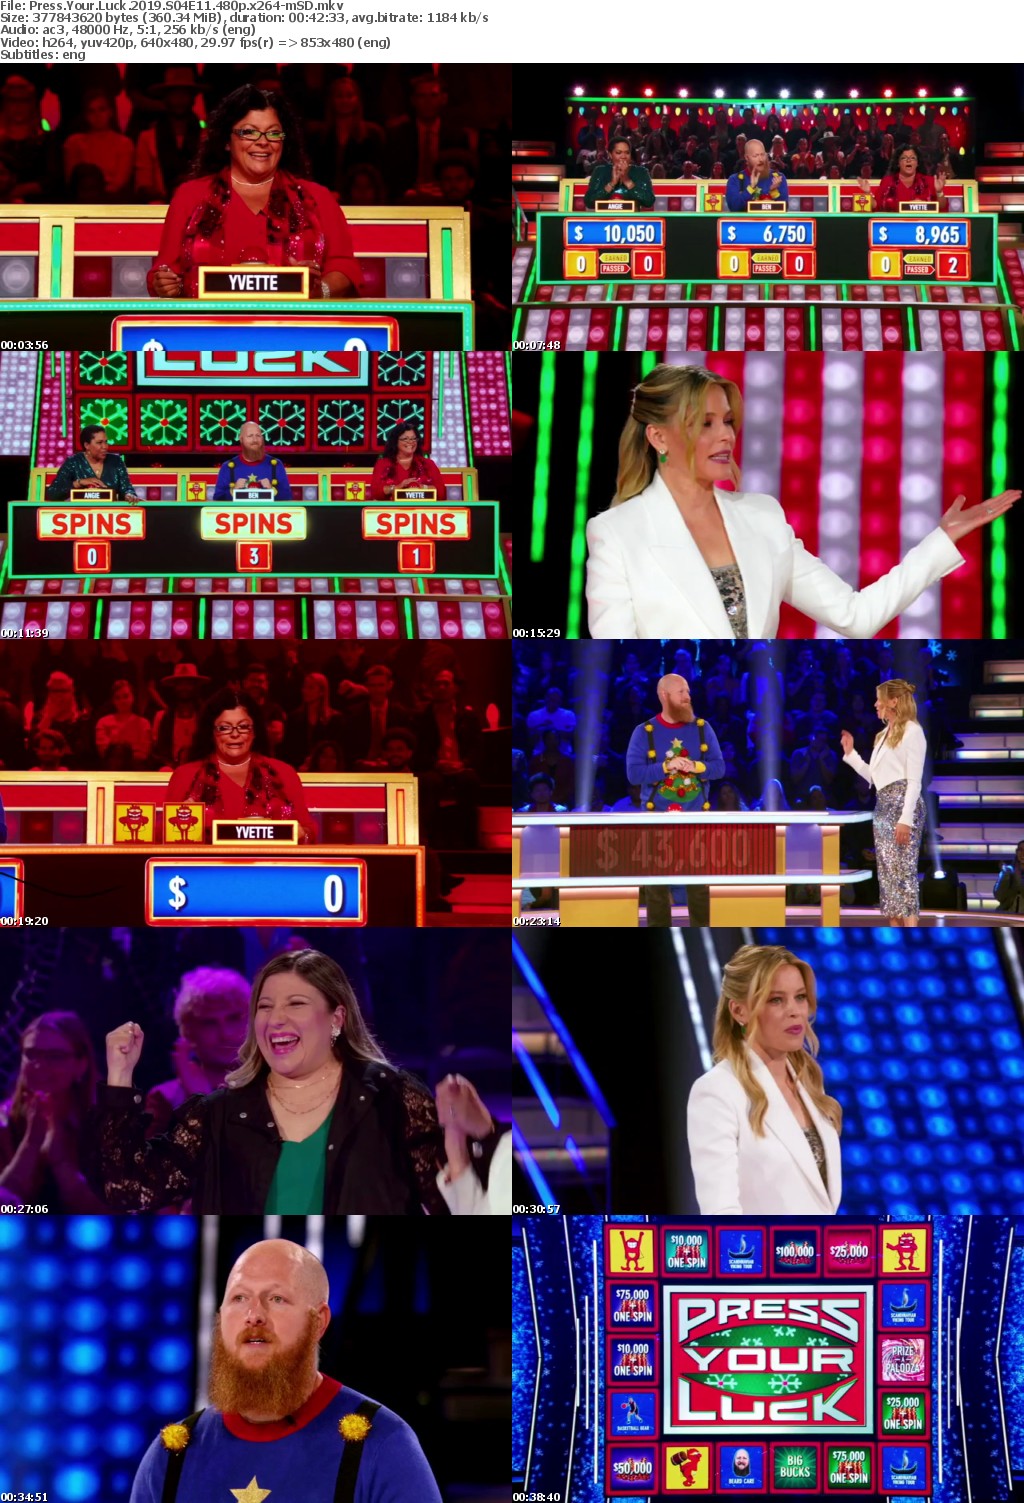 Press Your Luck 2019 S04E11 480p x264-mSD